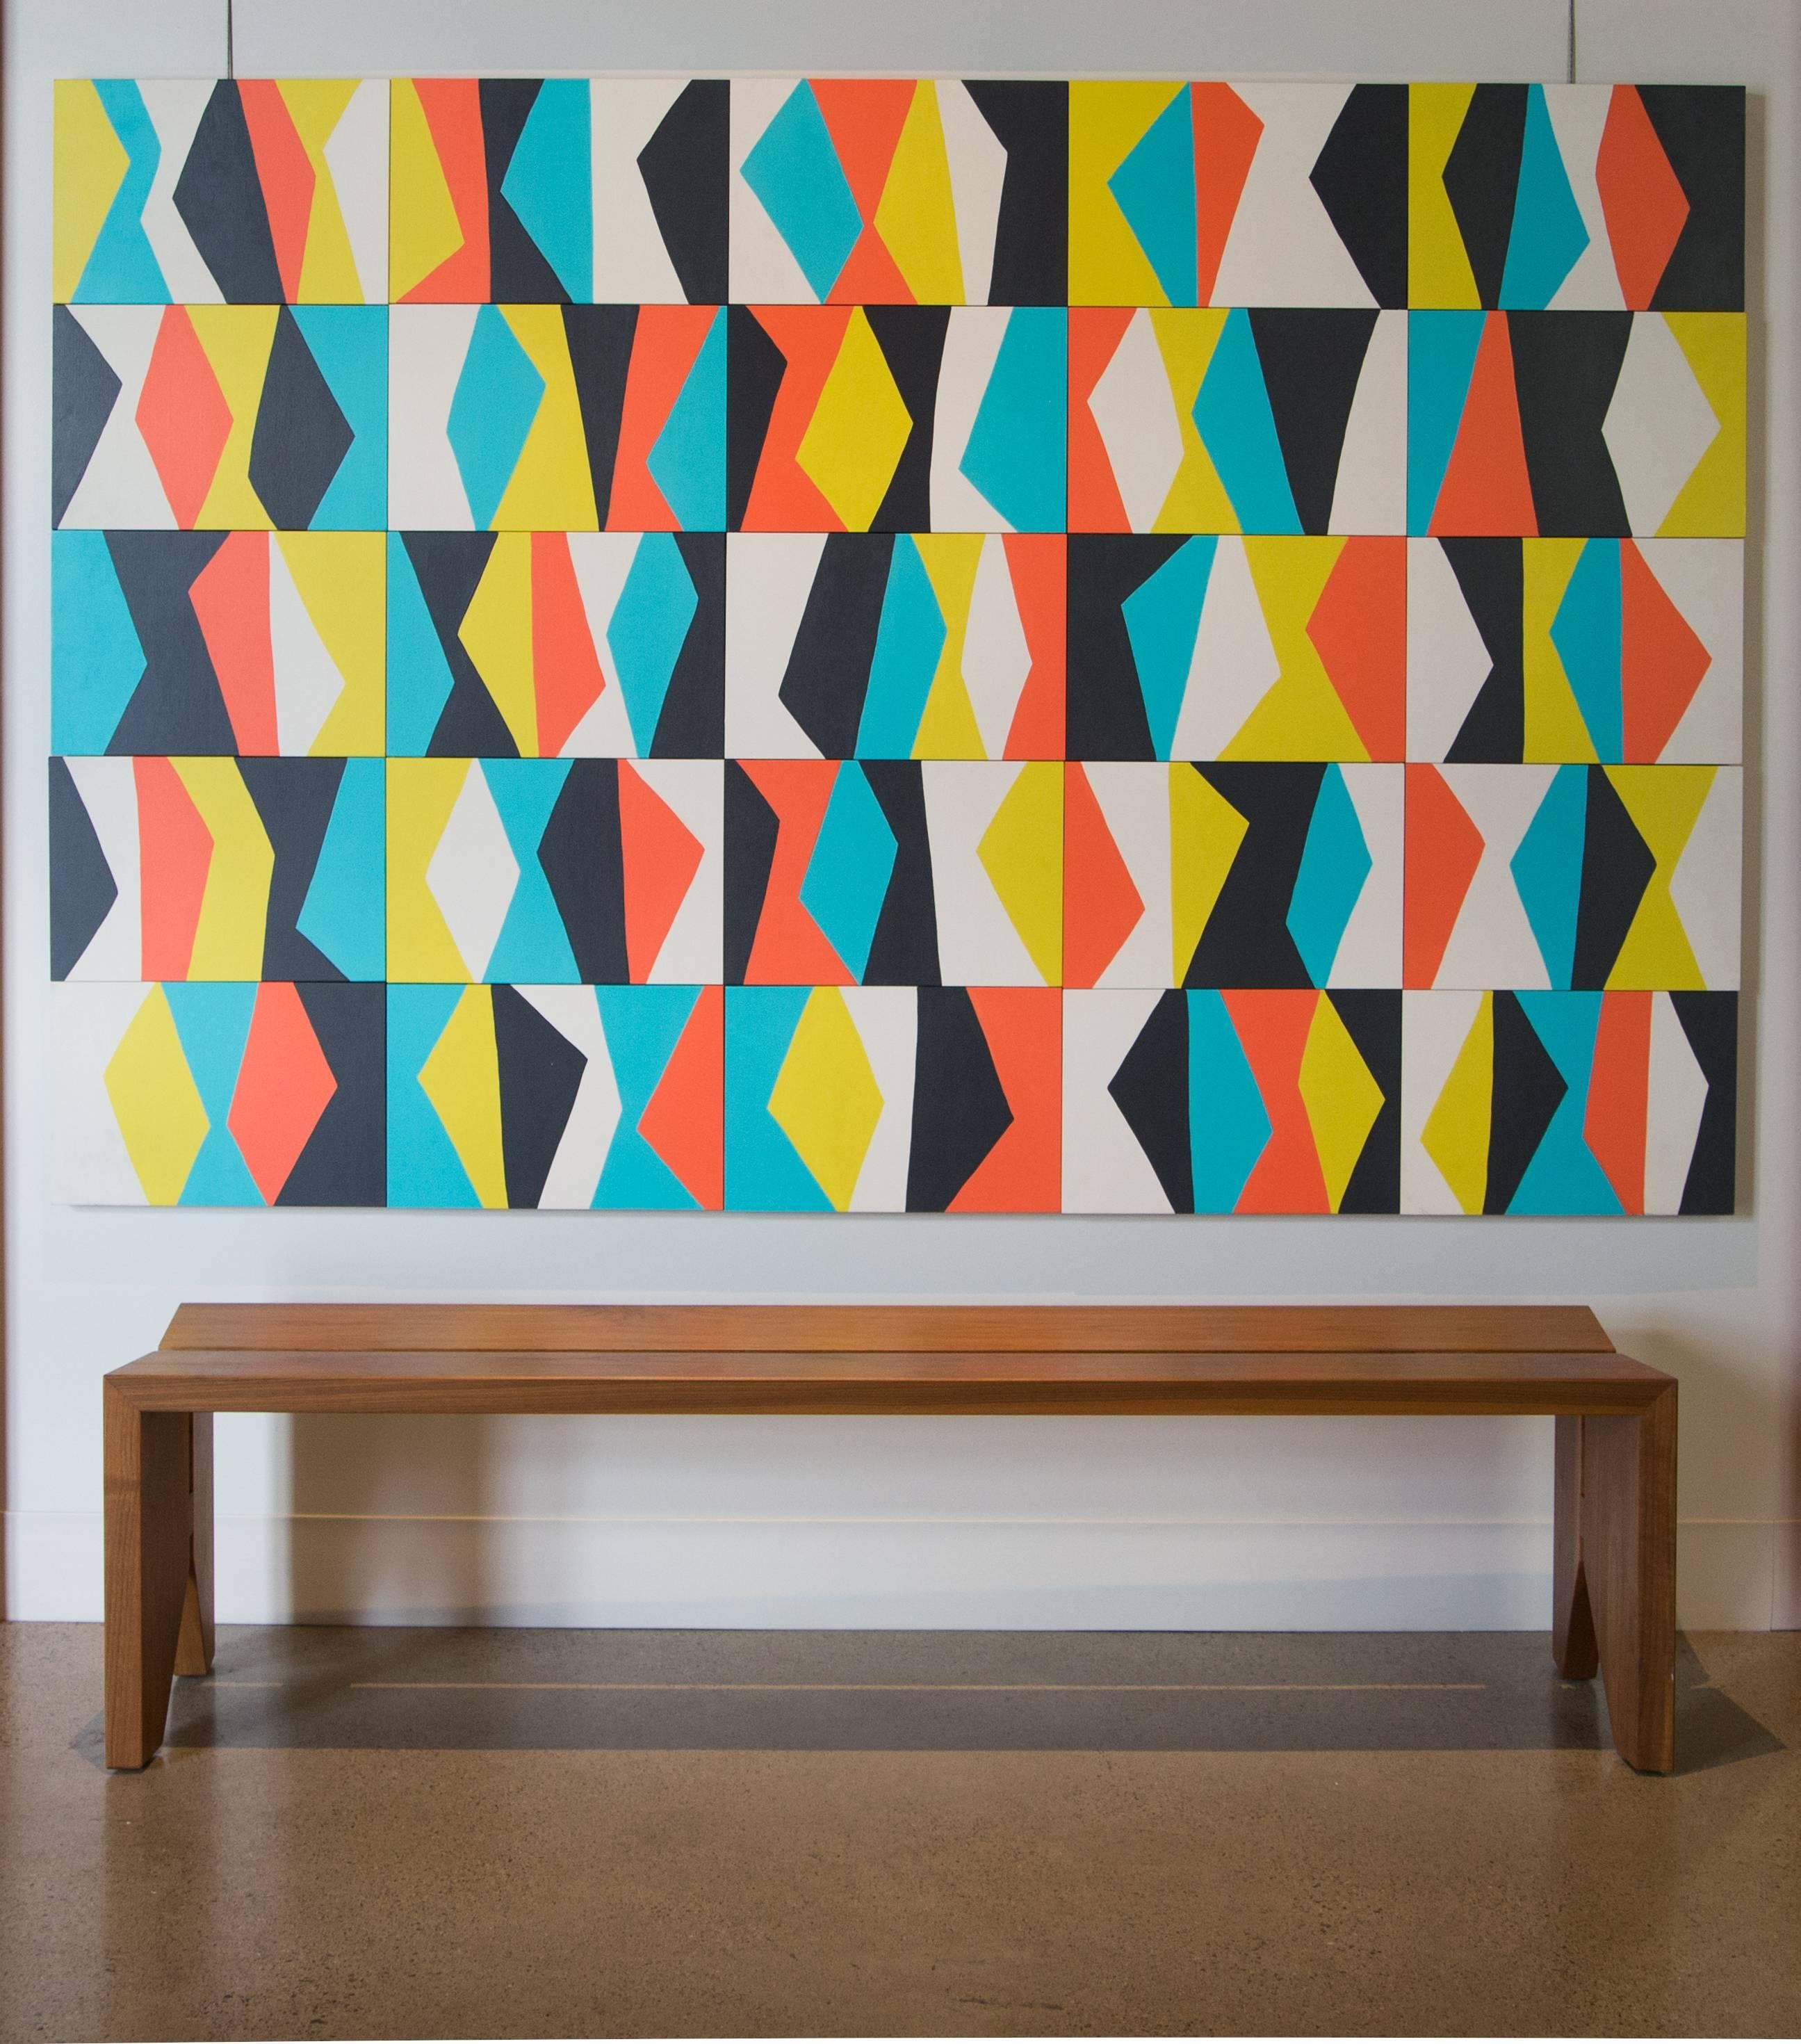 Jazz is an original tile painting by Angela Adams. Acrylic on birch panels. Comprised of 25 individually painted measure: 12” x 18” x 1” tiles, painted with vector angles in orange, yellow, blue and black, and arranged together to create the 5’ x